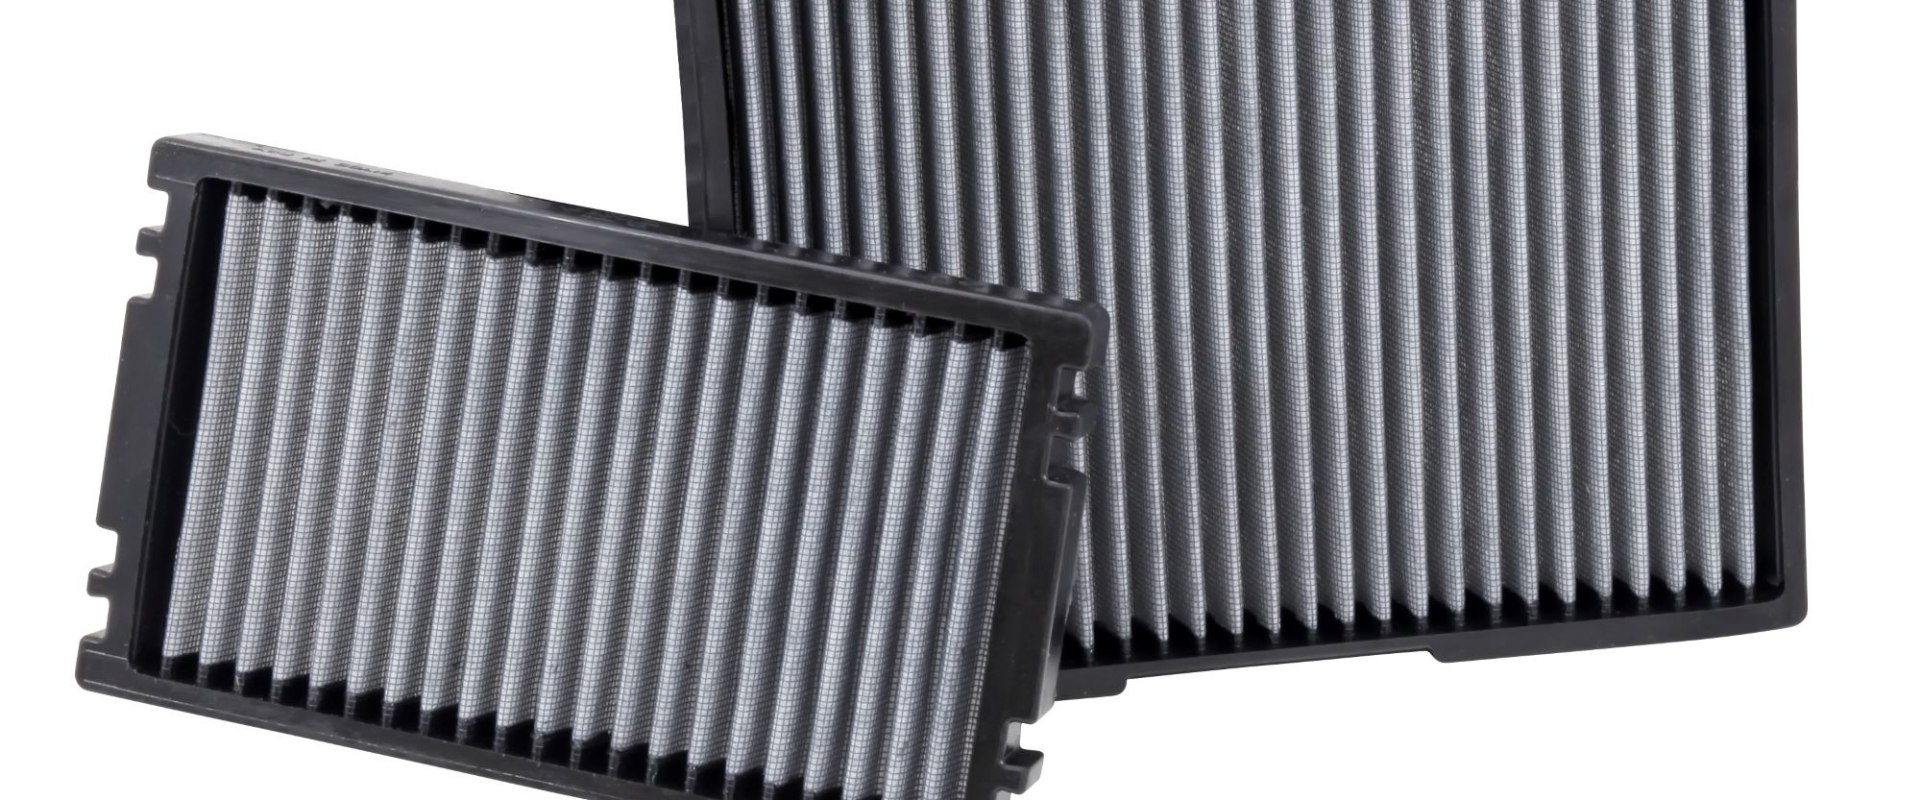 Choosing the Right 14x20x1 Air Filter for Your Car or Truck's Ventilation System